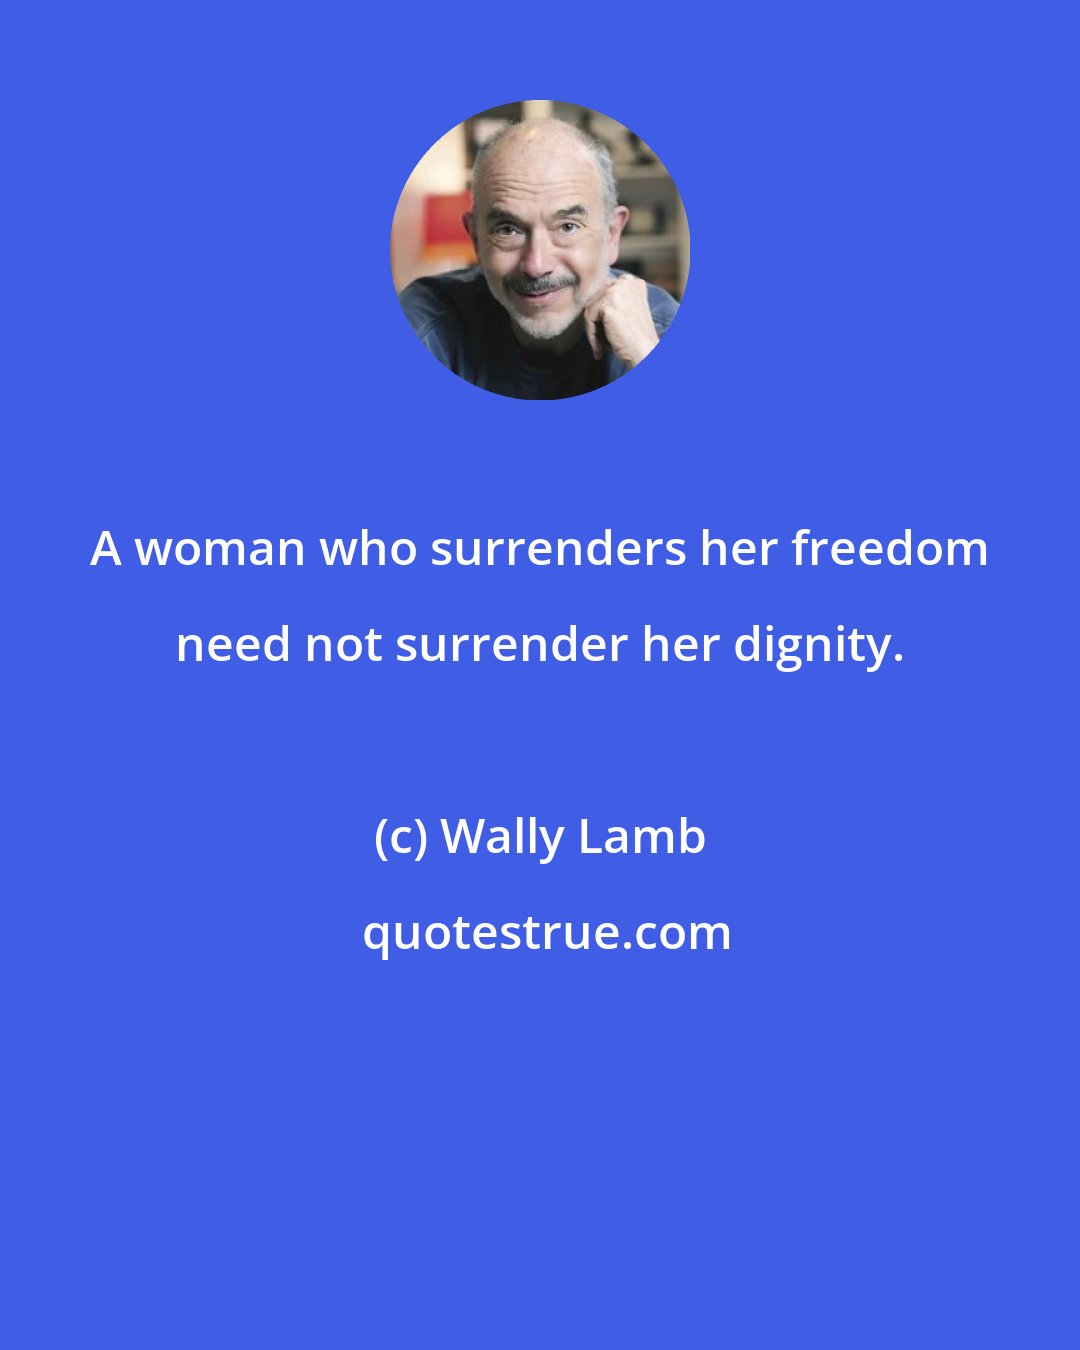 Wally Lamb: A woman who surrenders her freedom need not surrender her dignity.